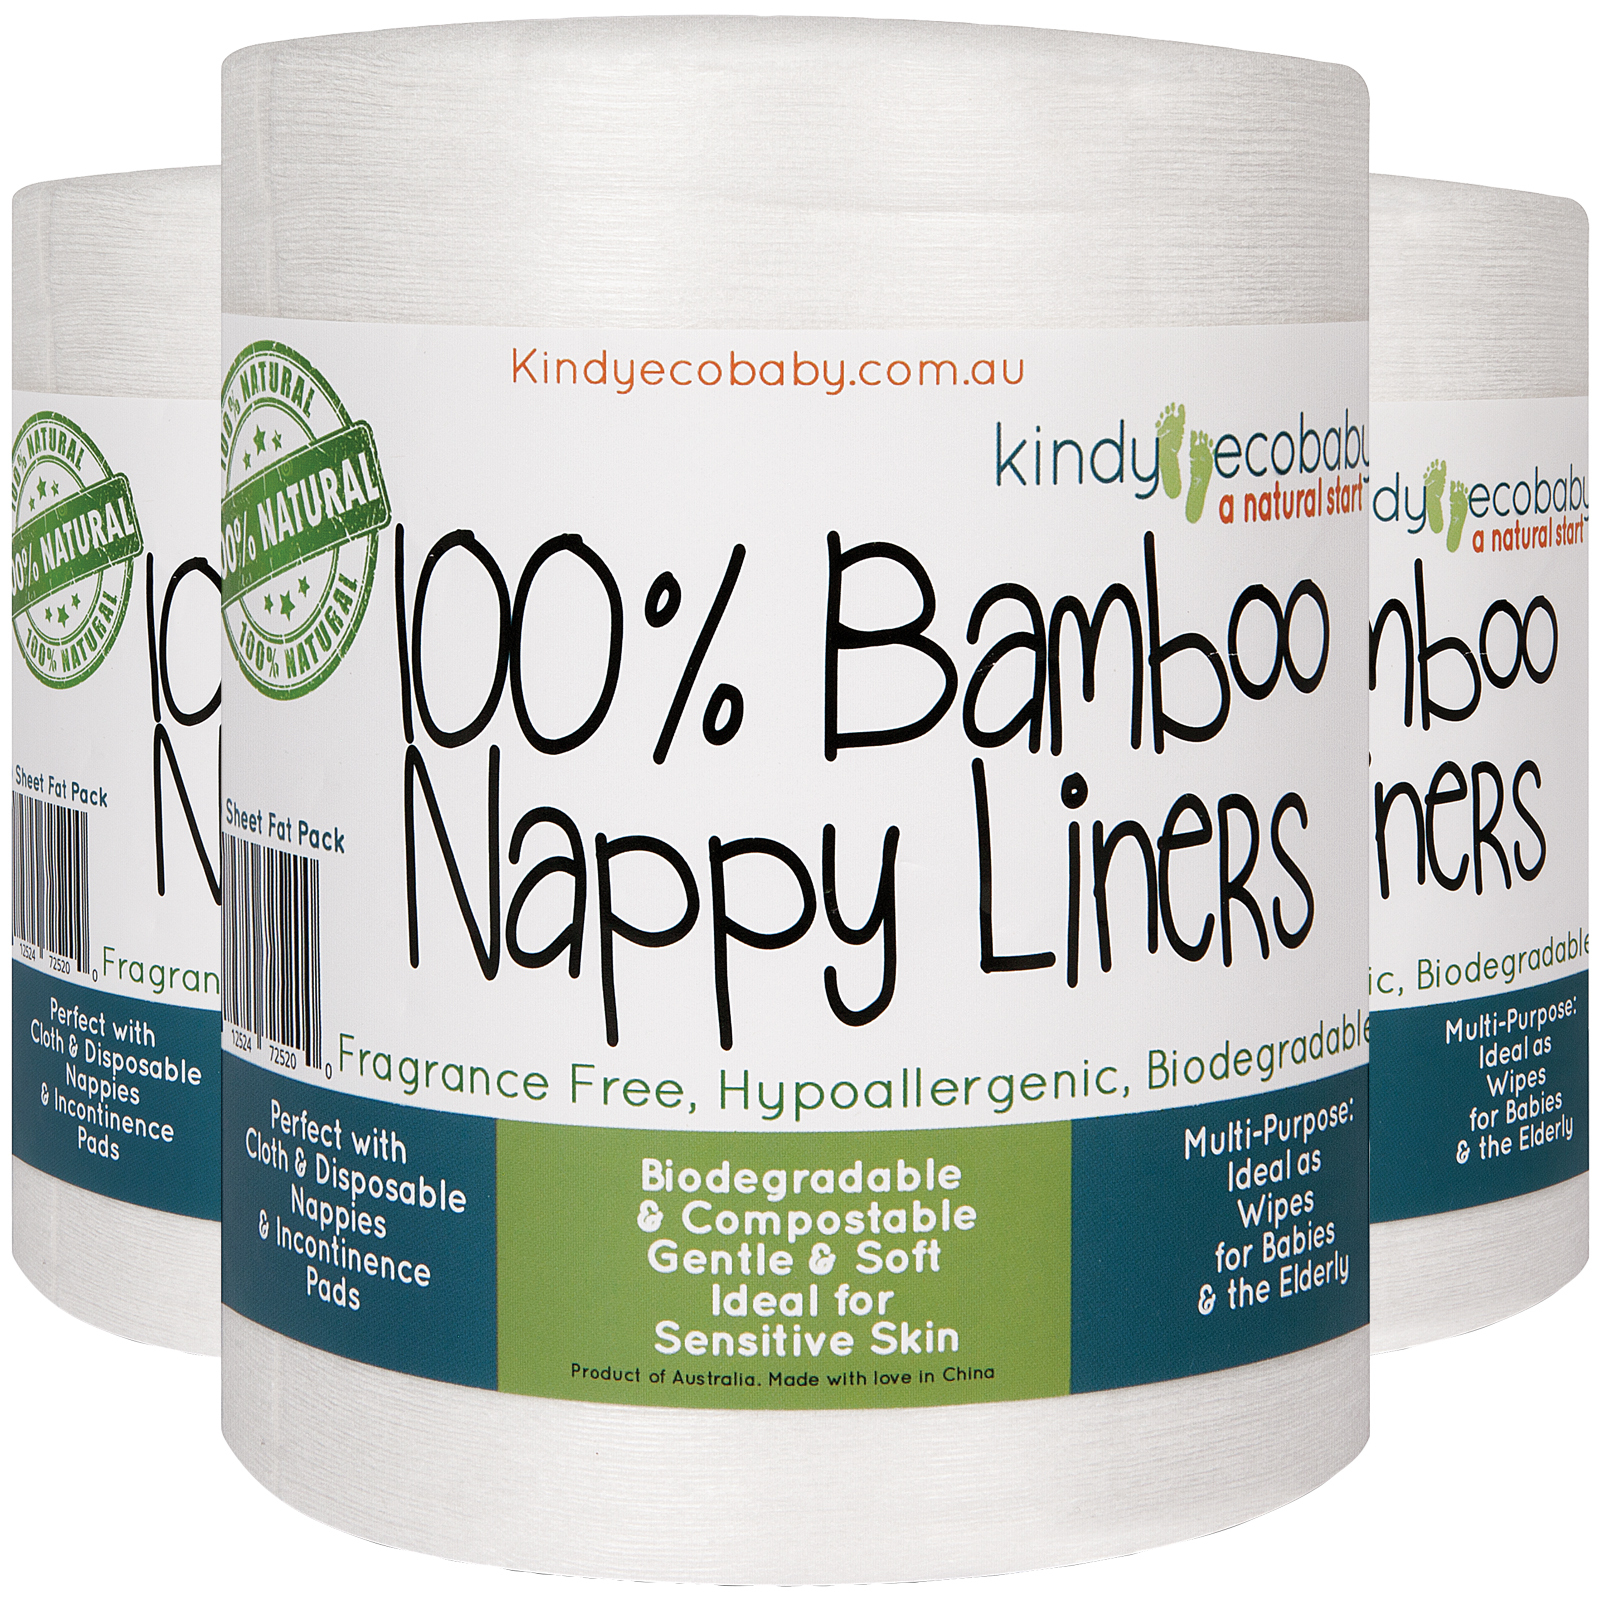 Three rolls of Kindy Ecobaby Disposable Bamboo Nappy Liners 